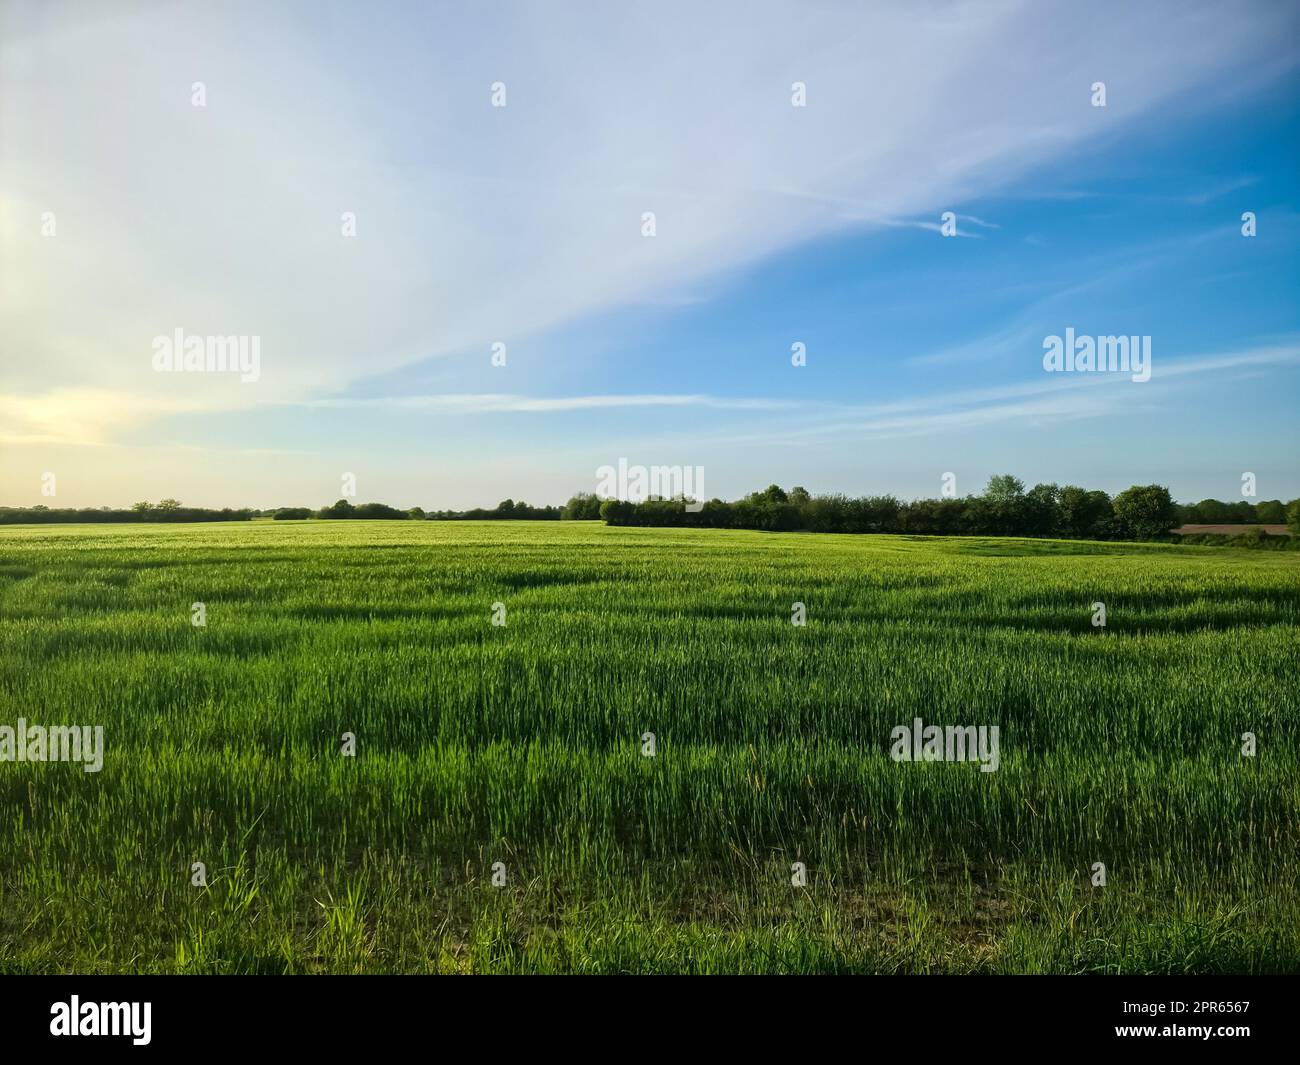 View of an agriculturally used field with green grass. Stock Photo